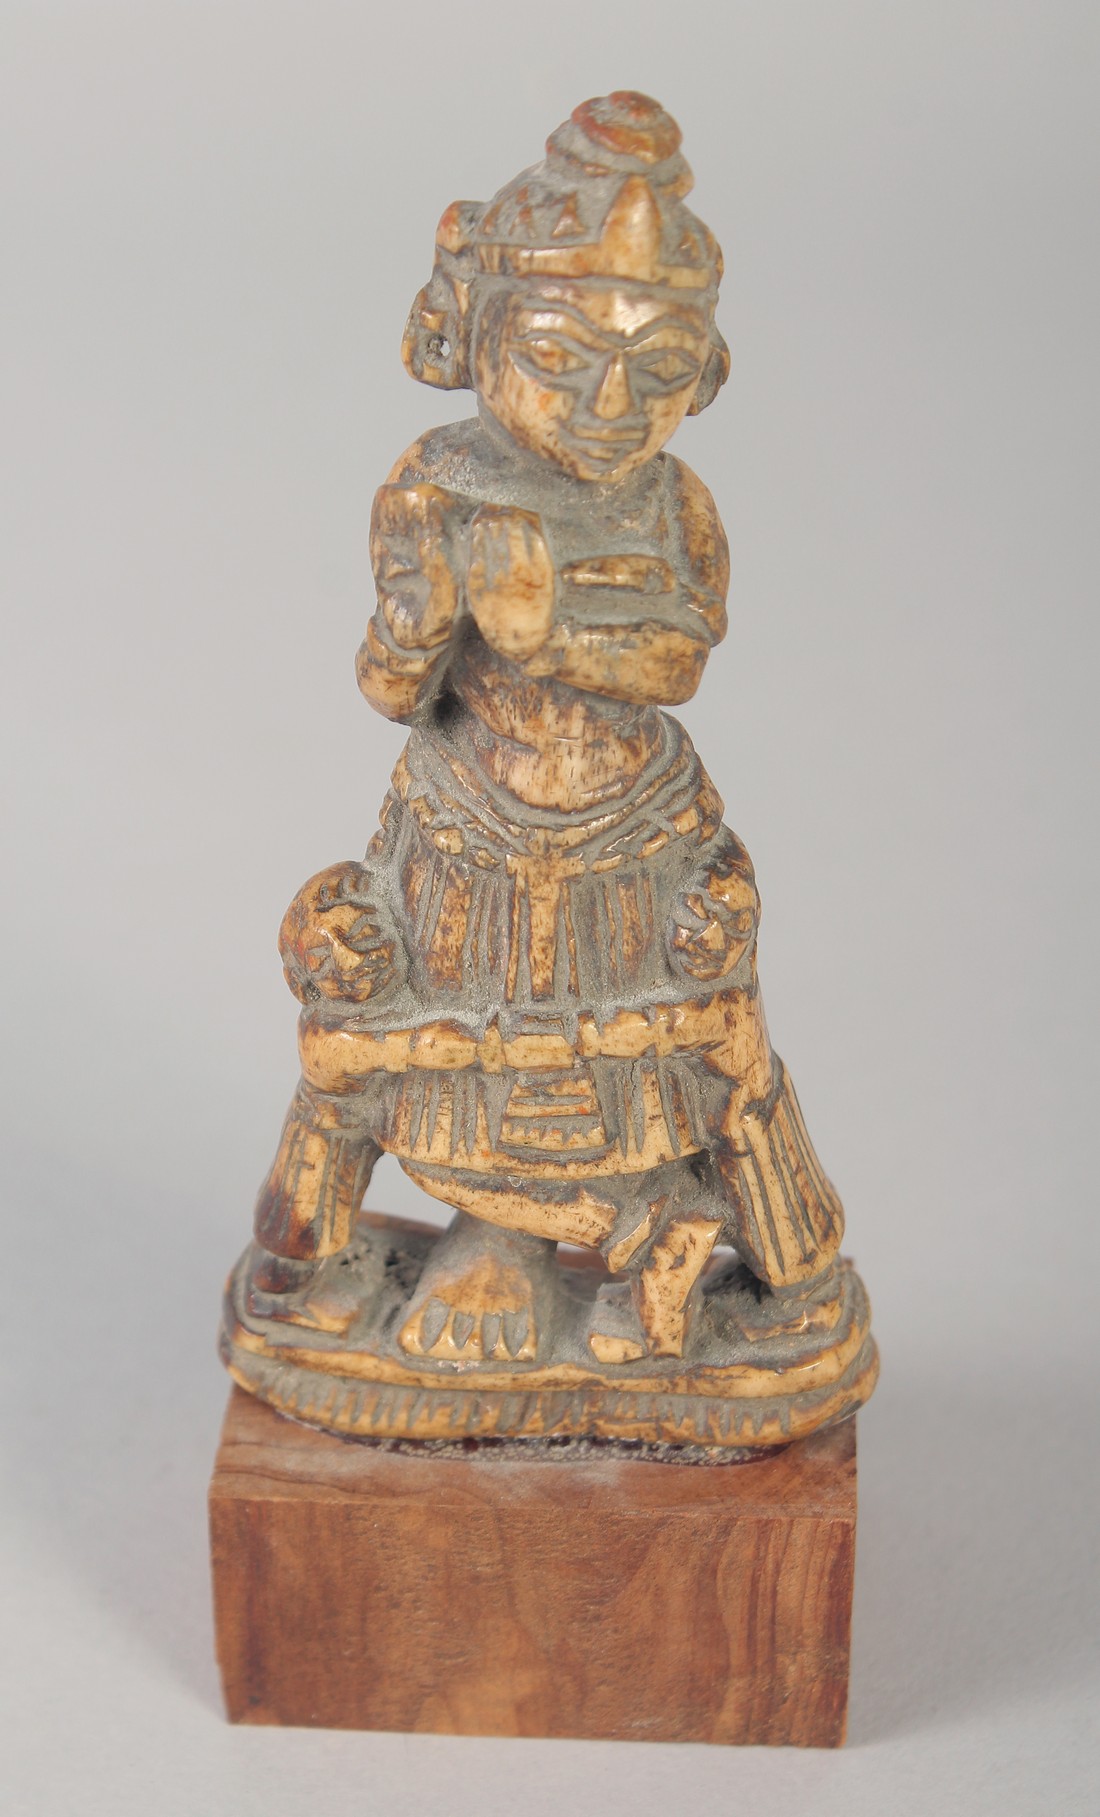 A 17TH CENTURY SOUTH INDIAN CARVED BONE FIGURE of fluting Krishna, mounted to a wooden base, carving